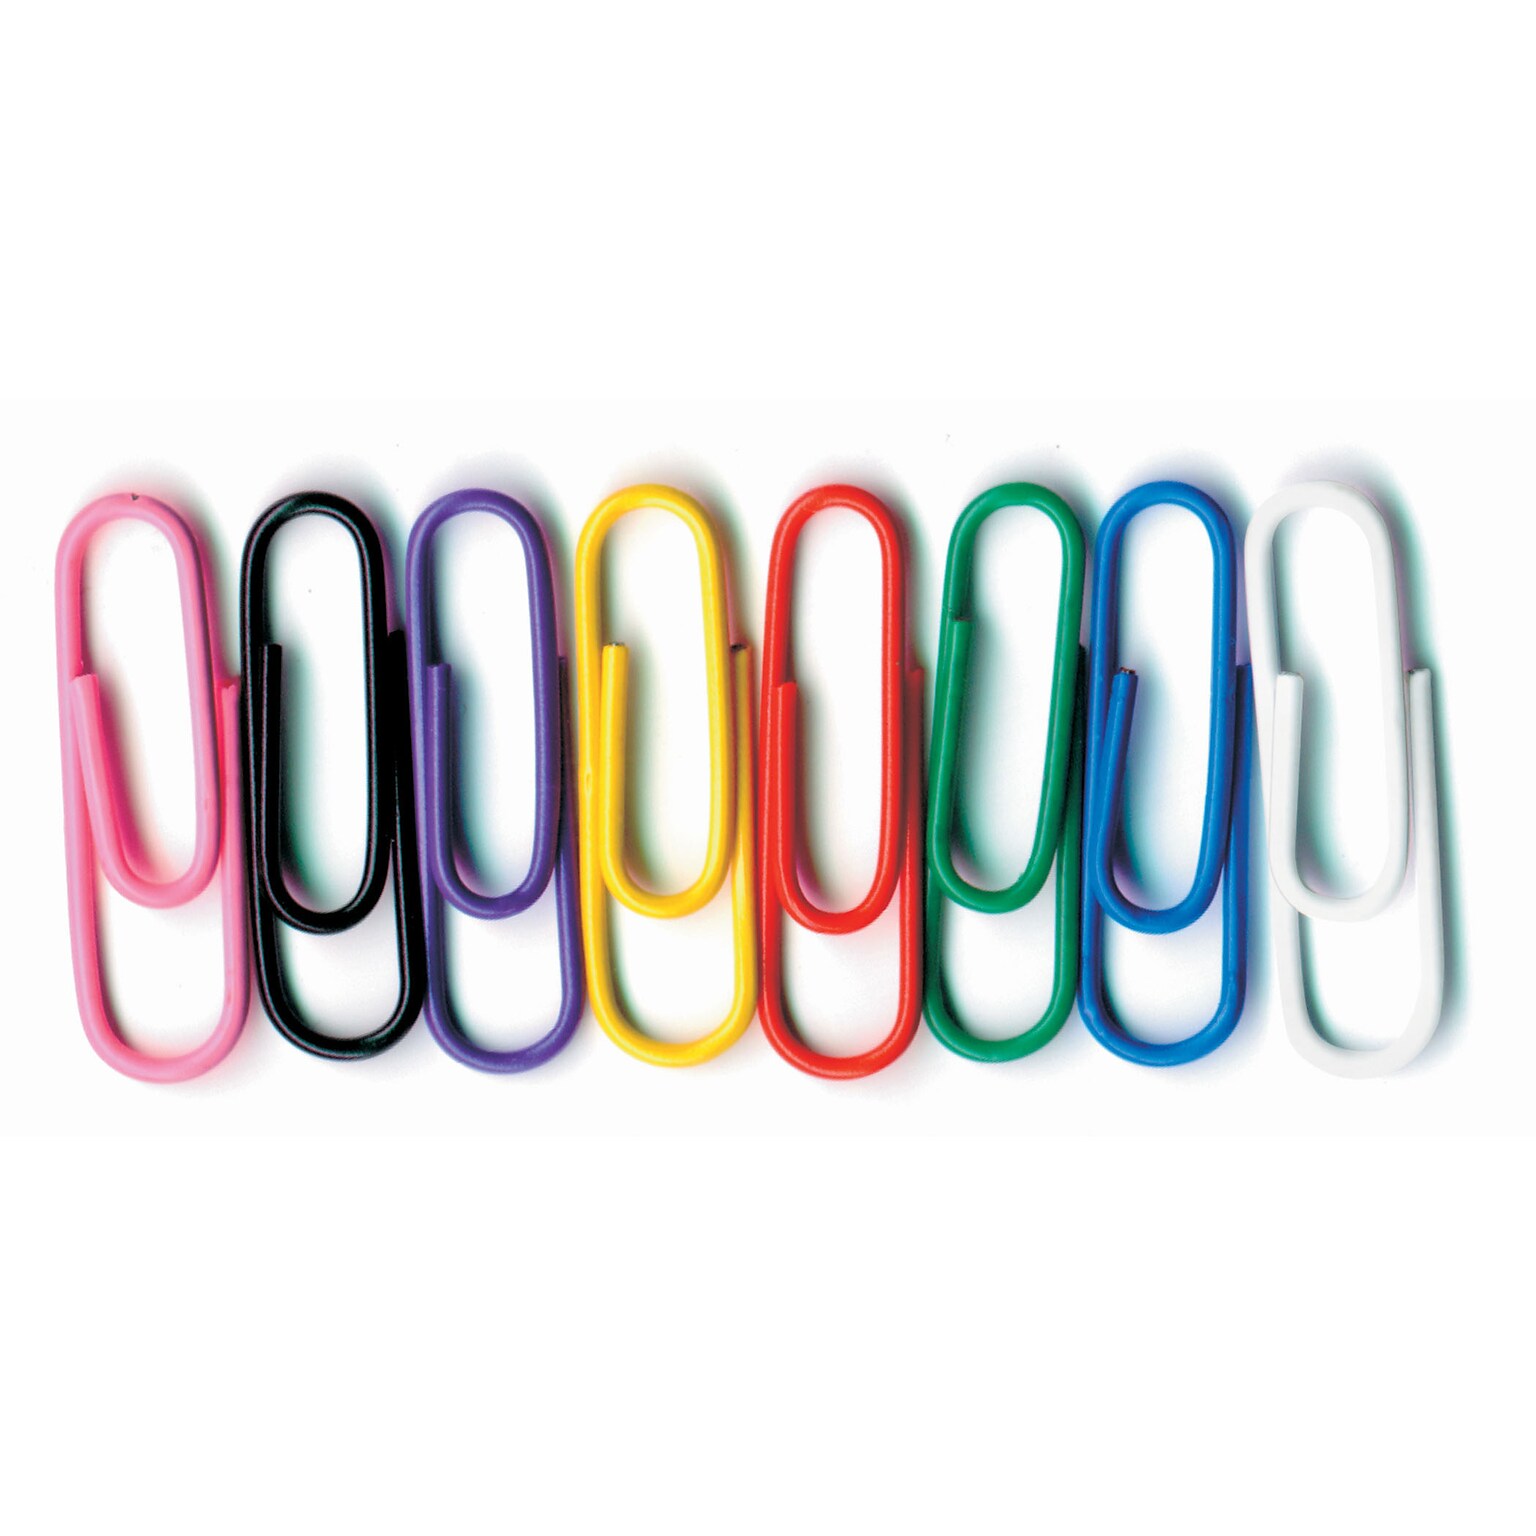 Baumgartens Inc. Small Paper Clips, Assorted Colors, 10 packs of 100 (BAUMES5000)